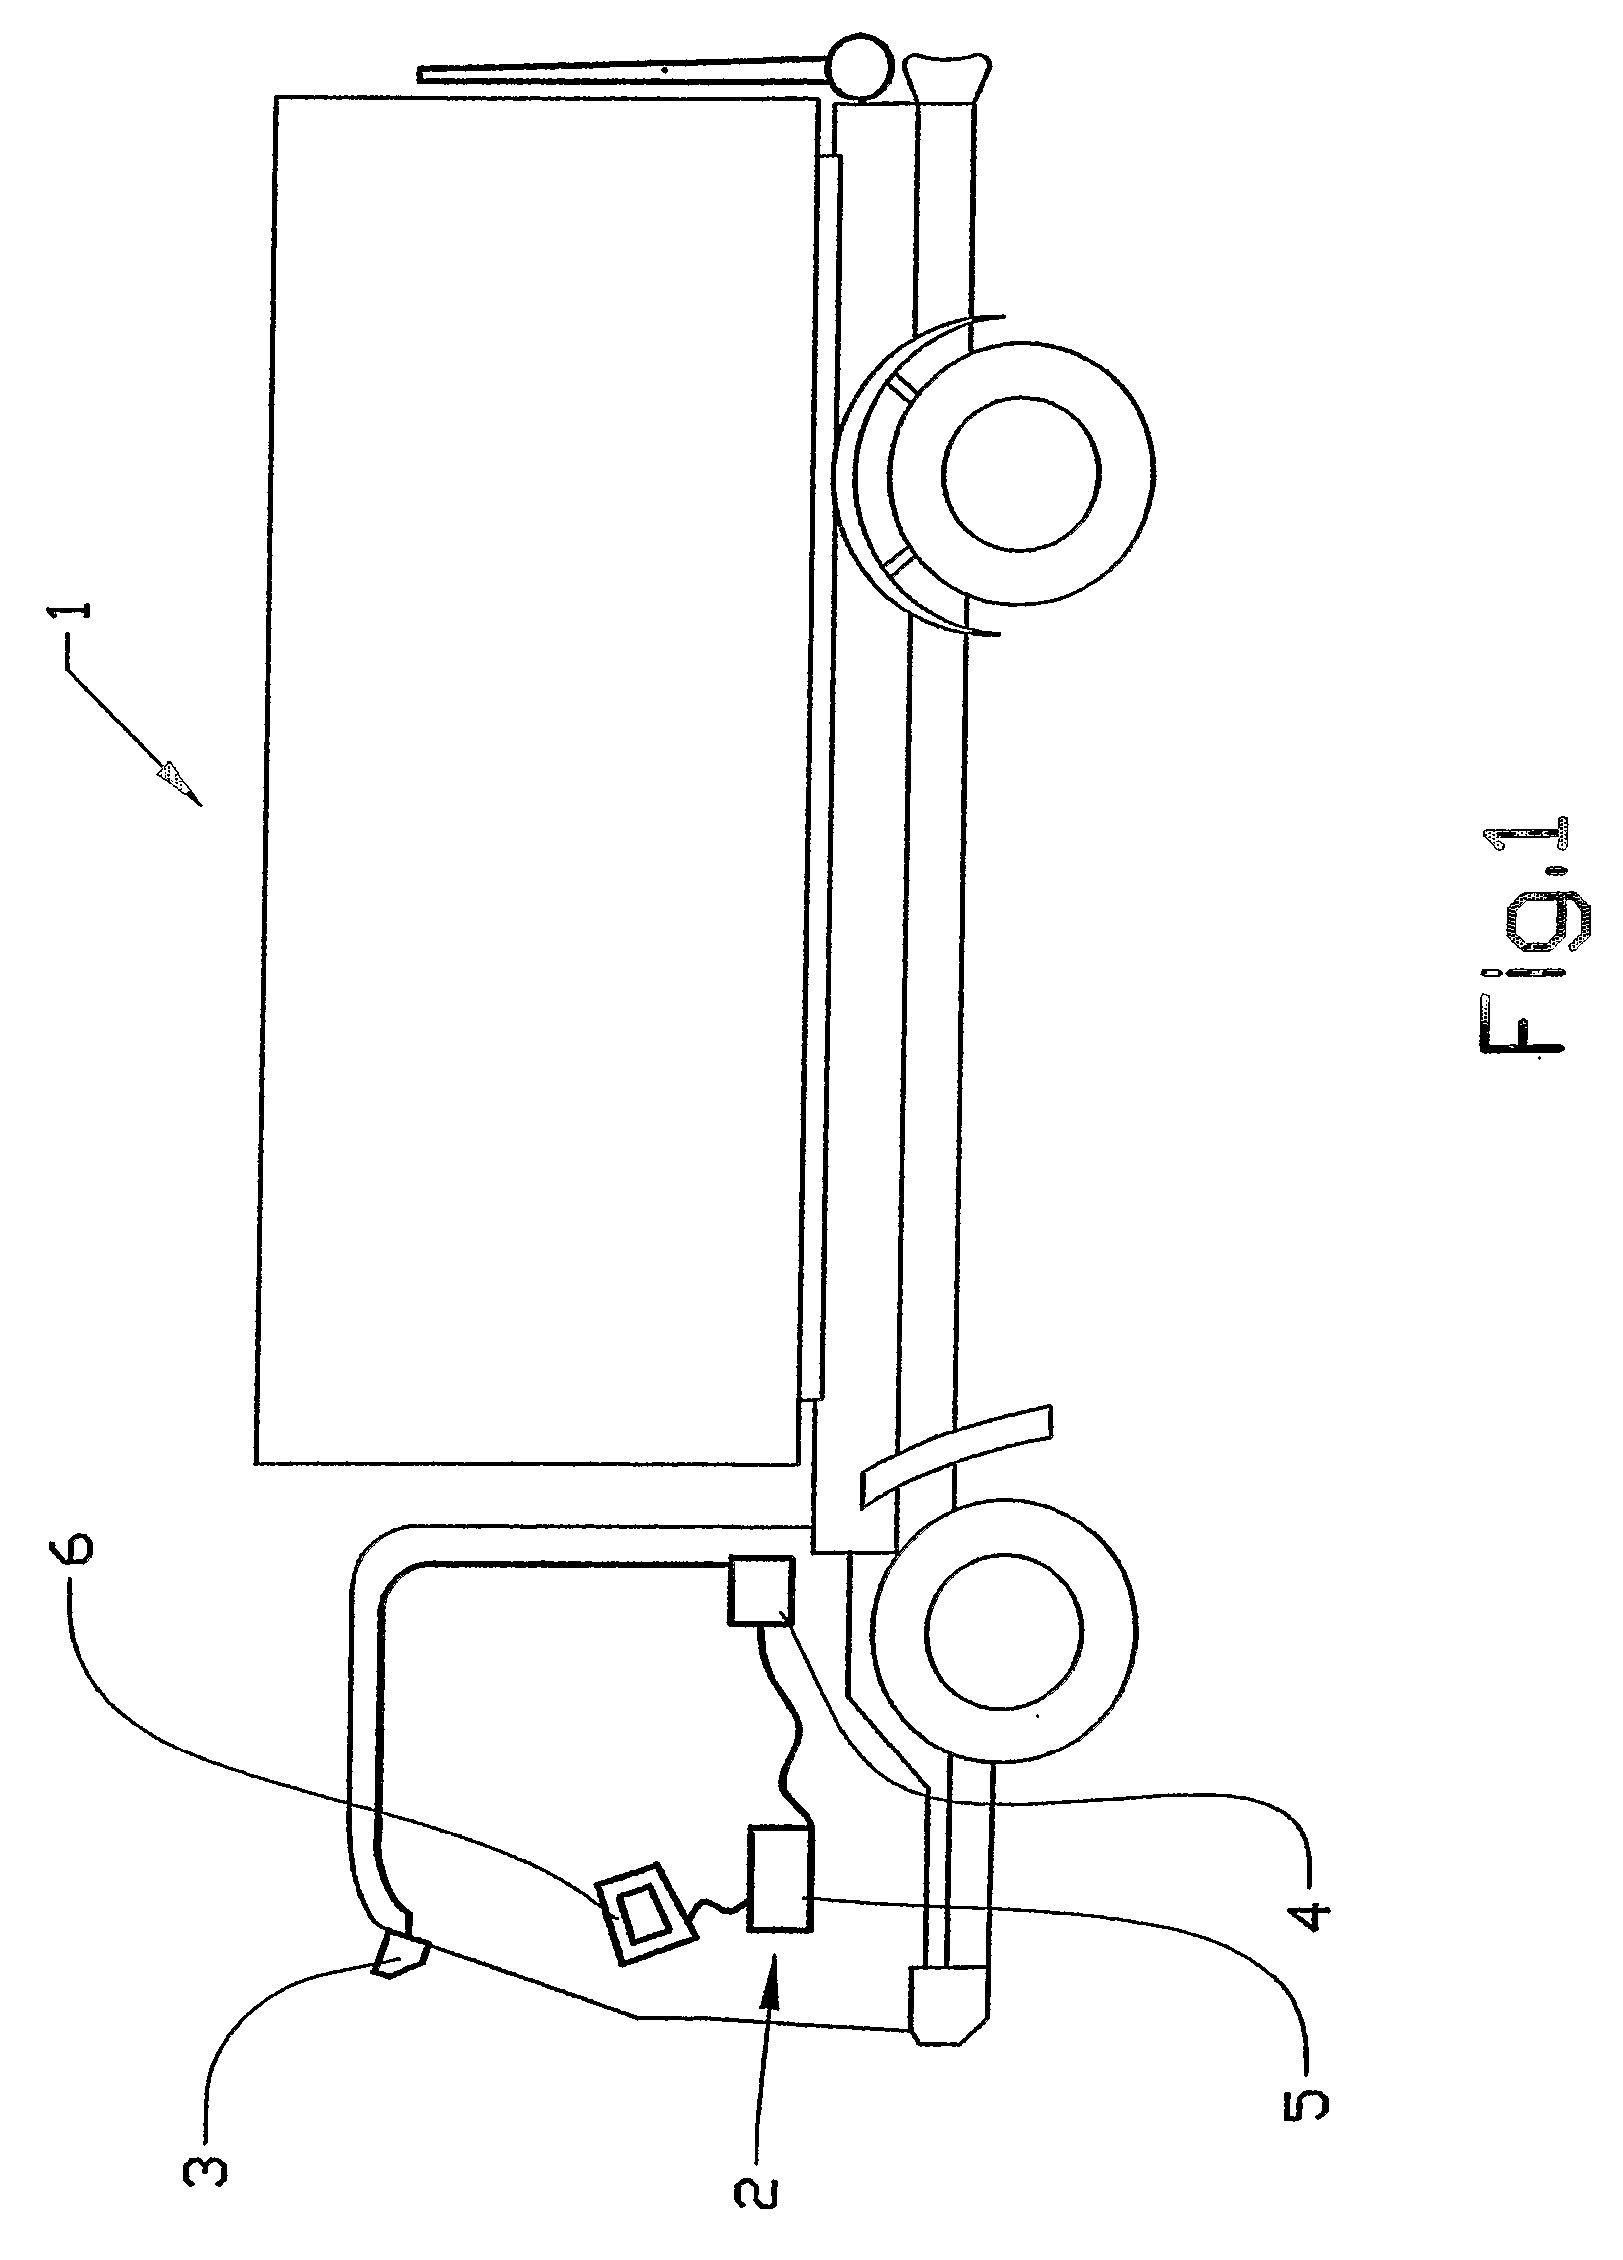 Apparatus and method for alerting a driver when a vehicle departs from a predefined driving area in a lane